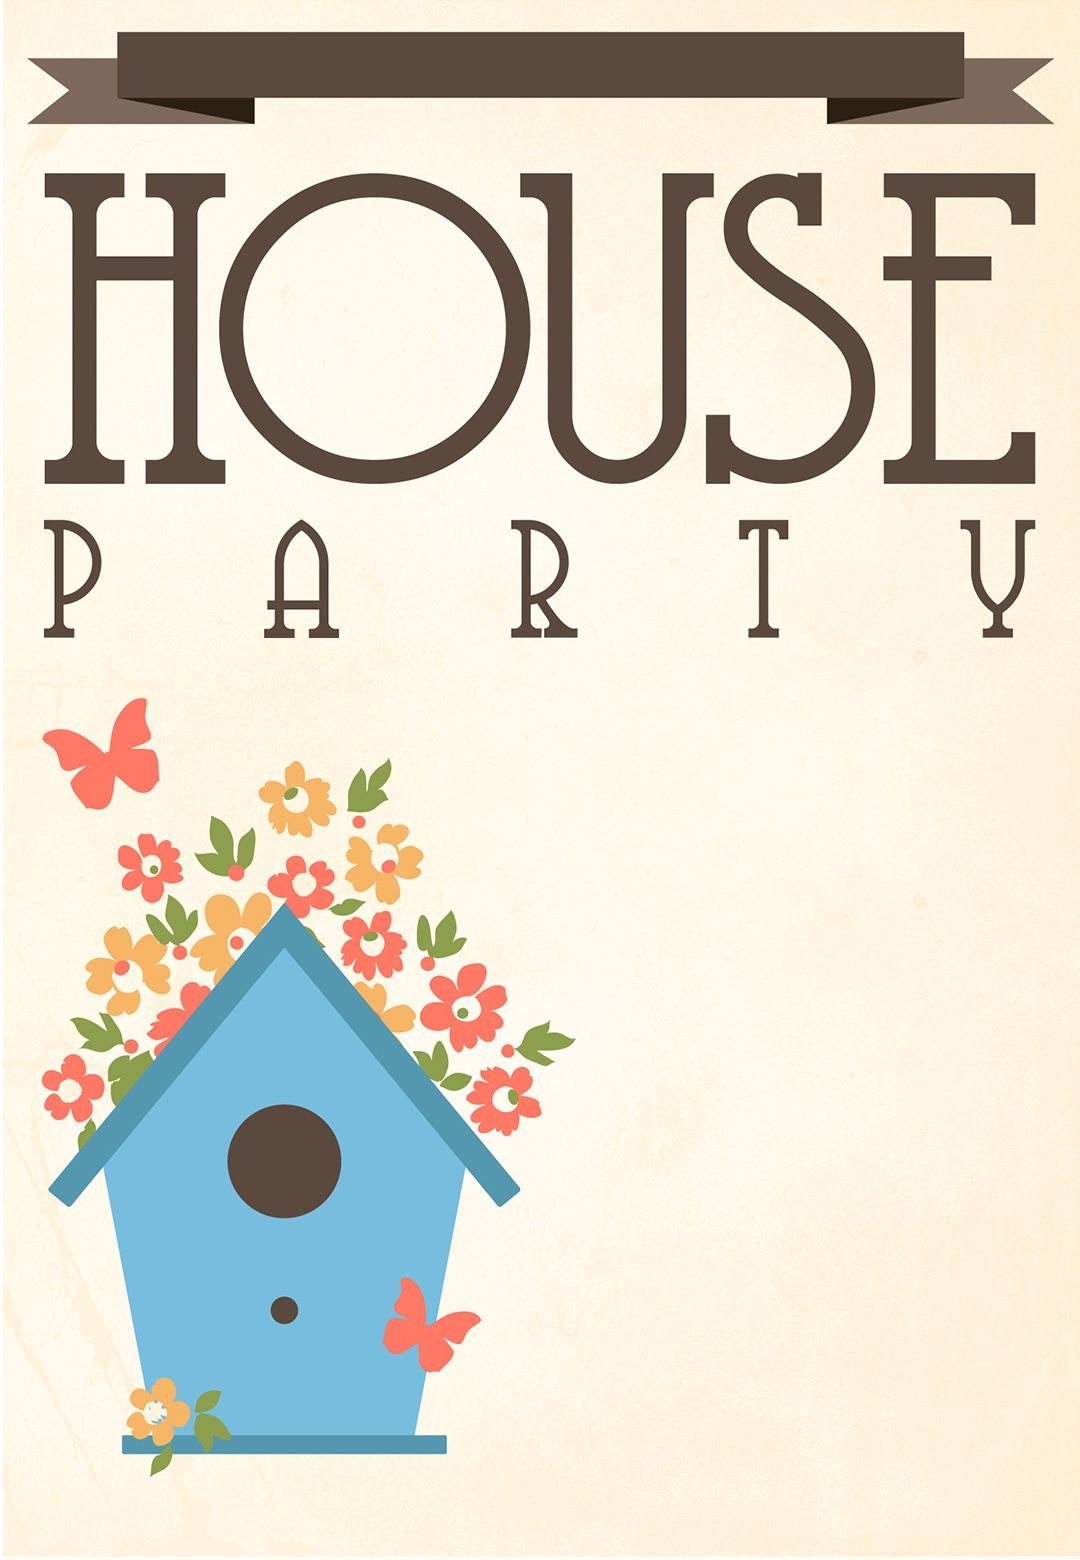 Free Printable House Party Invitation Fontsprintablestemplates inside dimensions 1080 X 1560